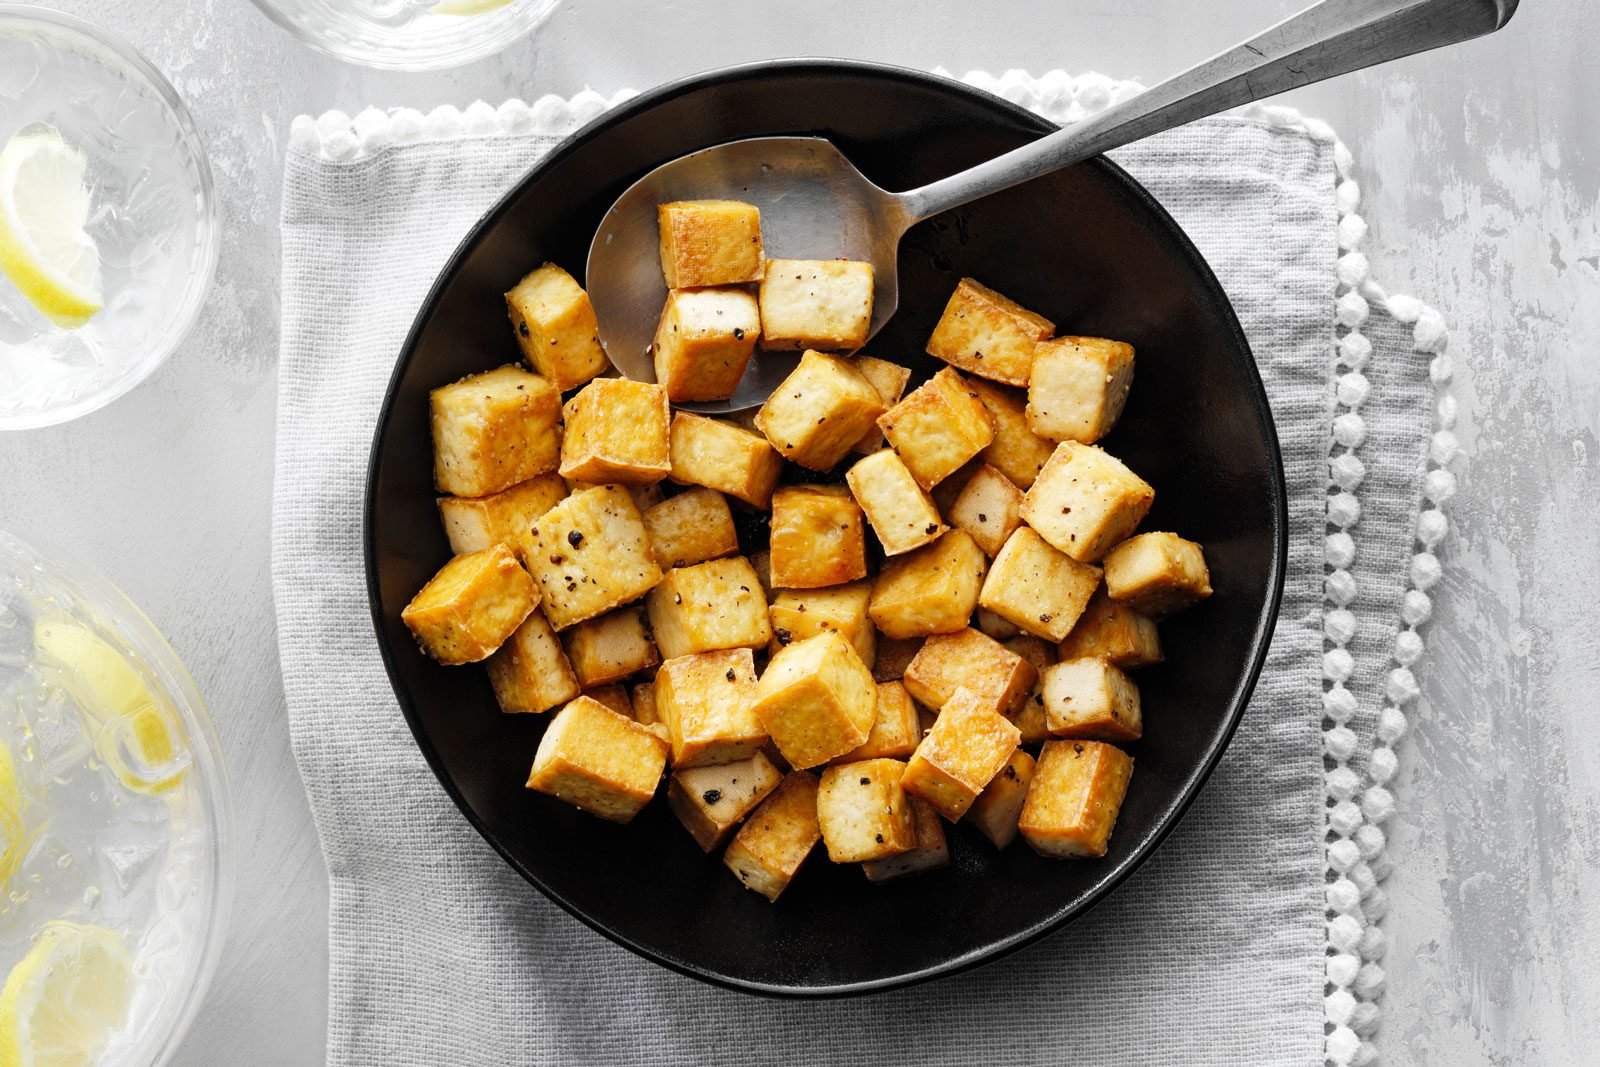 What Is Tofu? | Types of Tofu, Nutrition Facts and How to Cook Tofu